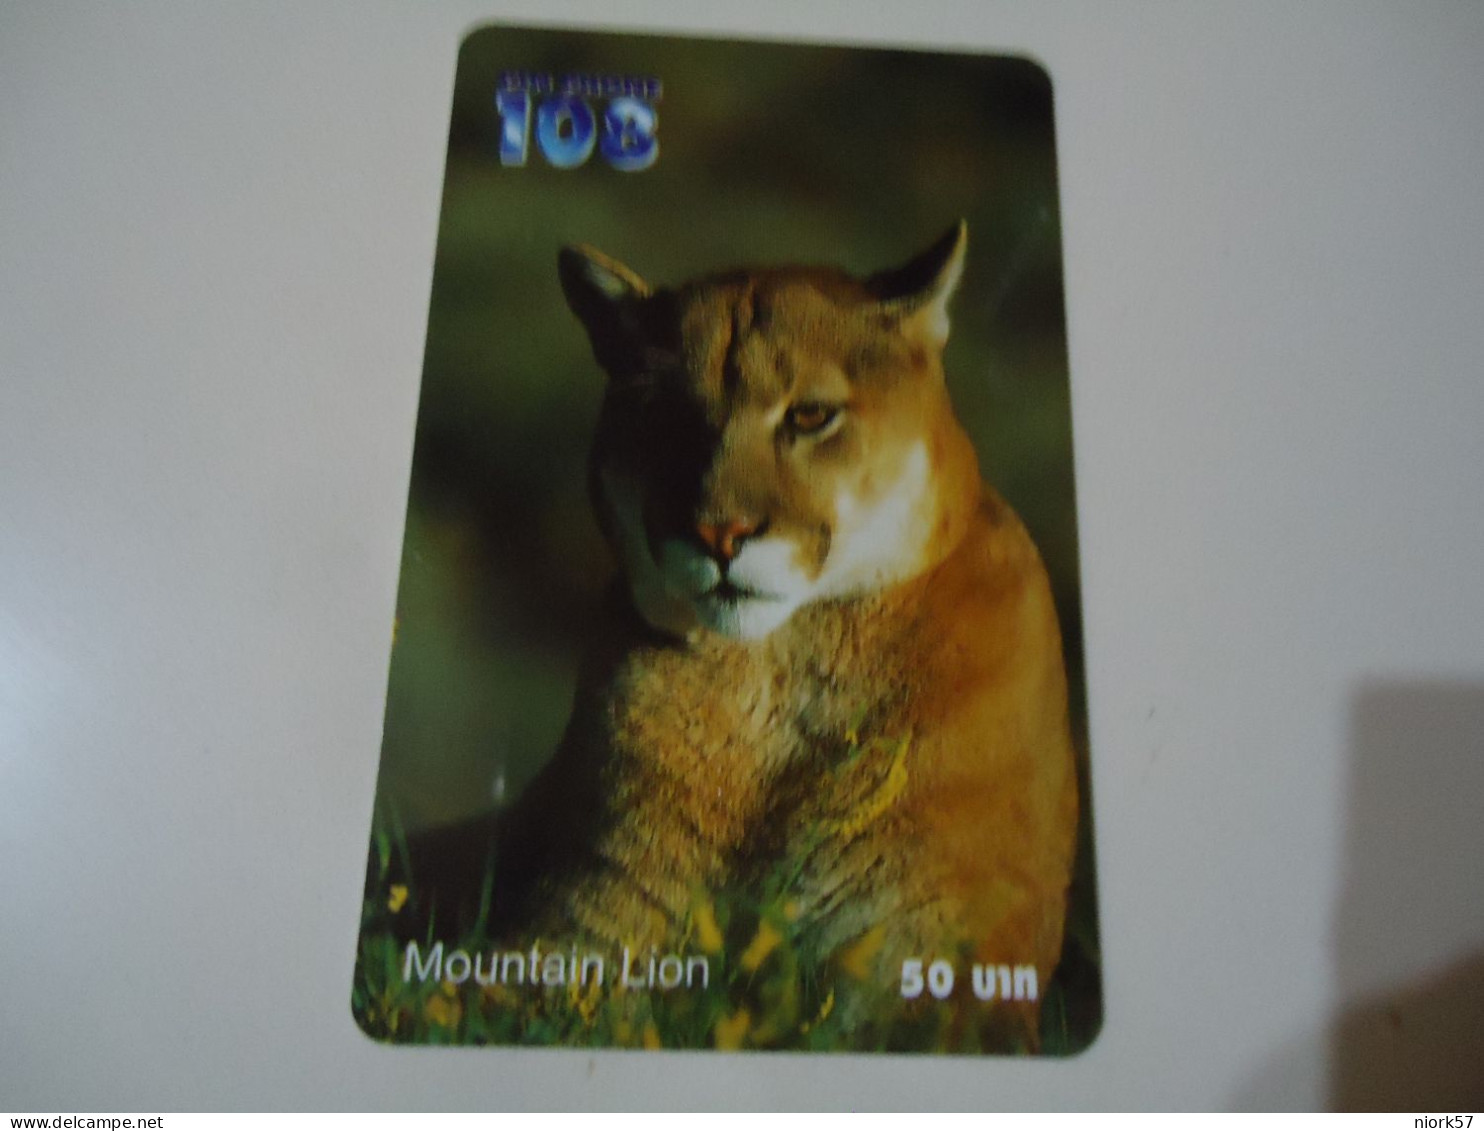 THAILAND USED  CARDS PIN 108 ANIMALS  MOUNTAIN LION - Jungle